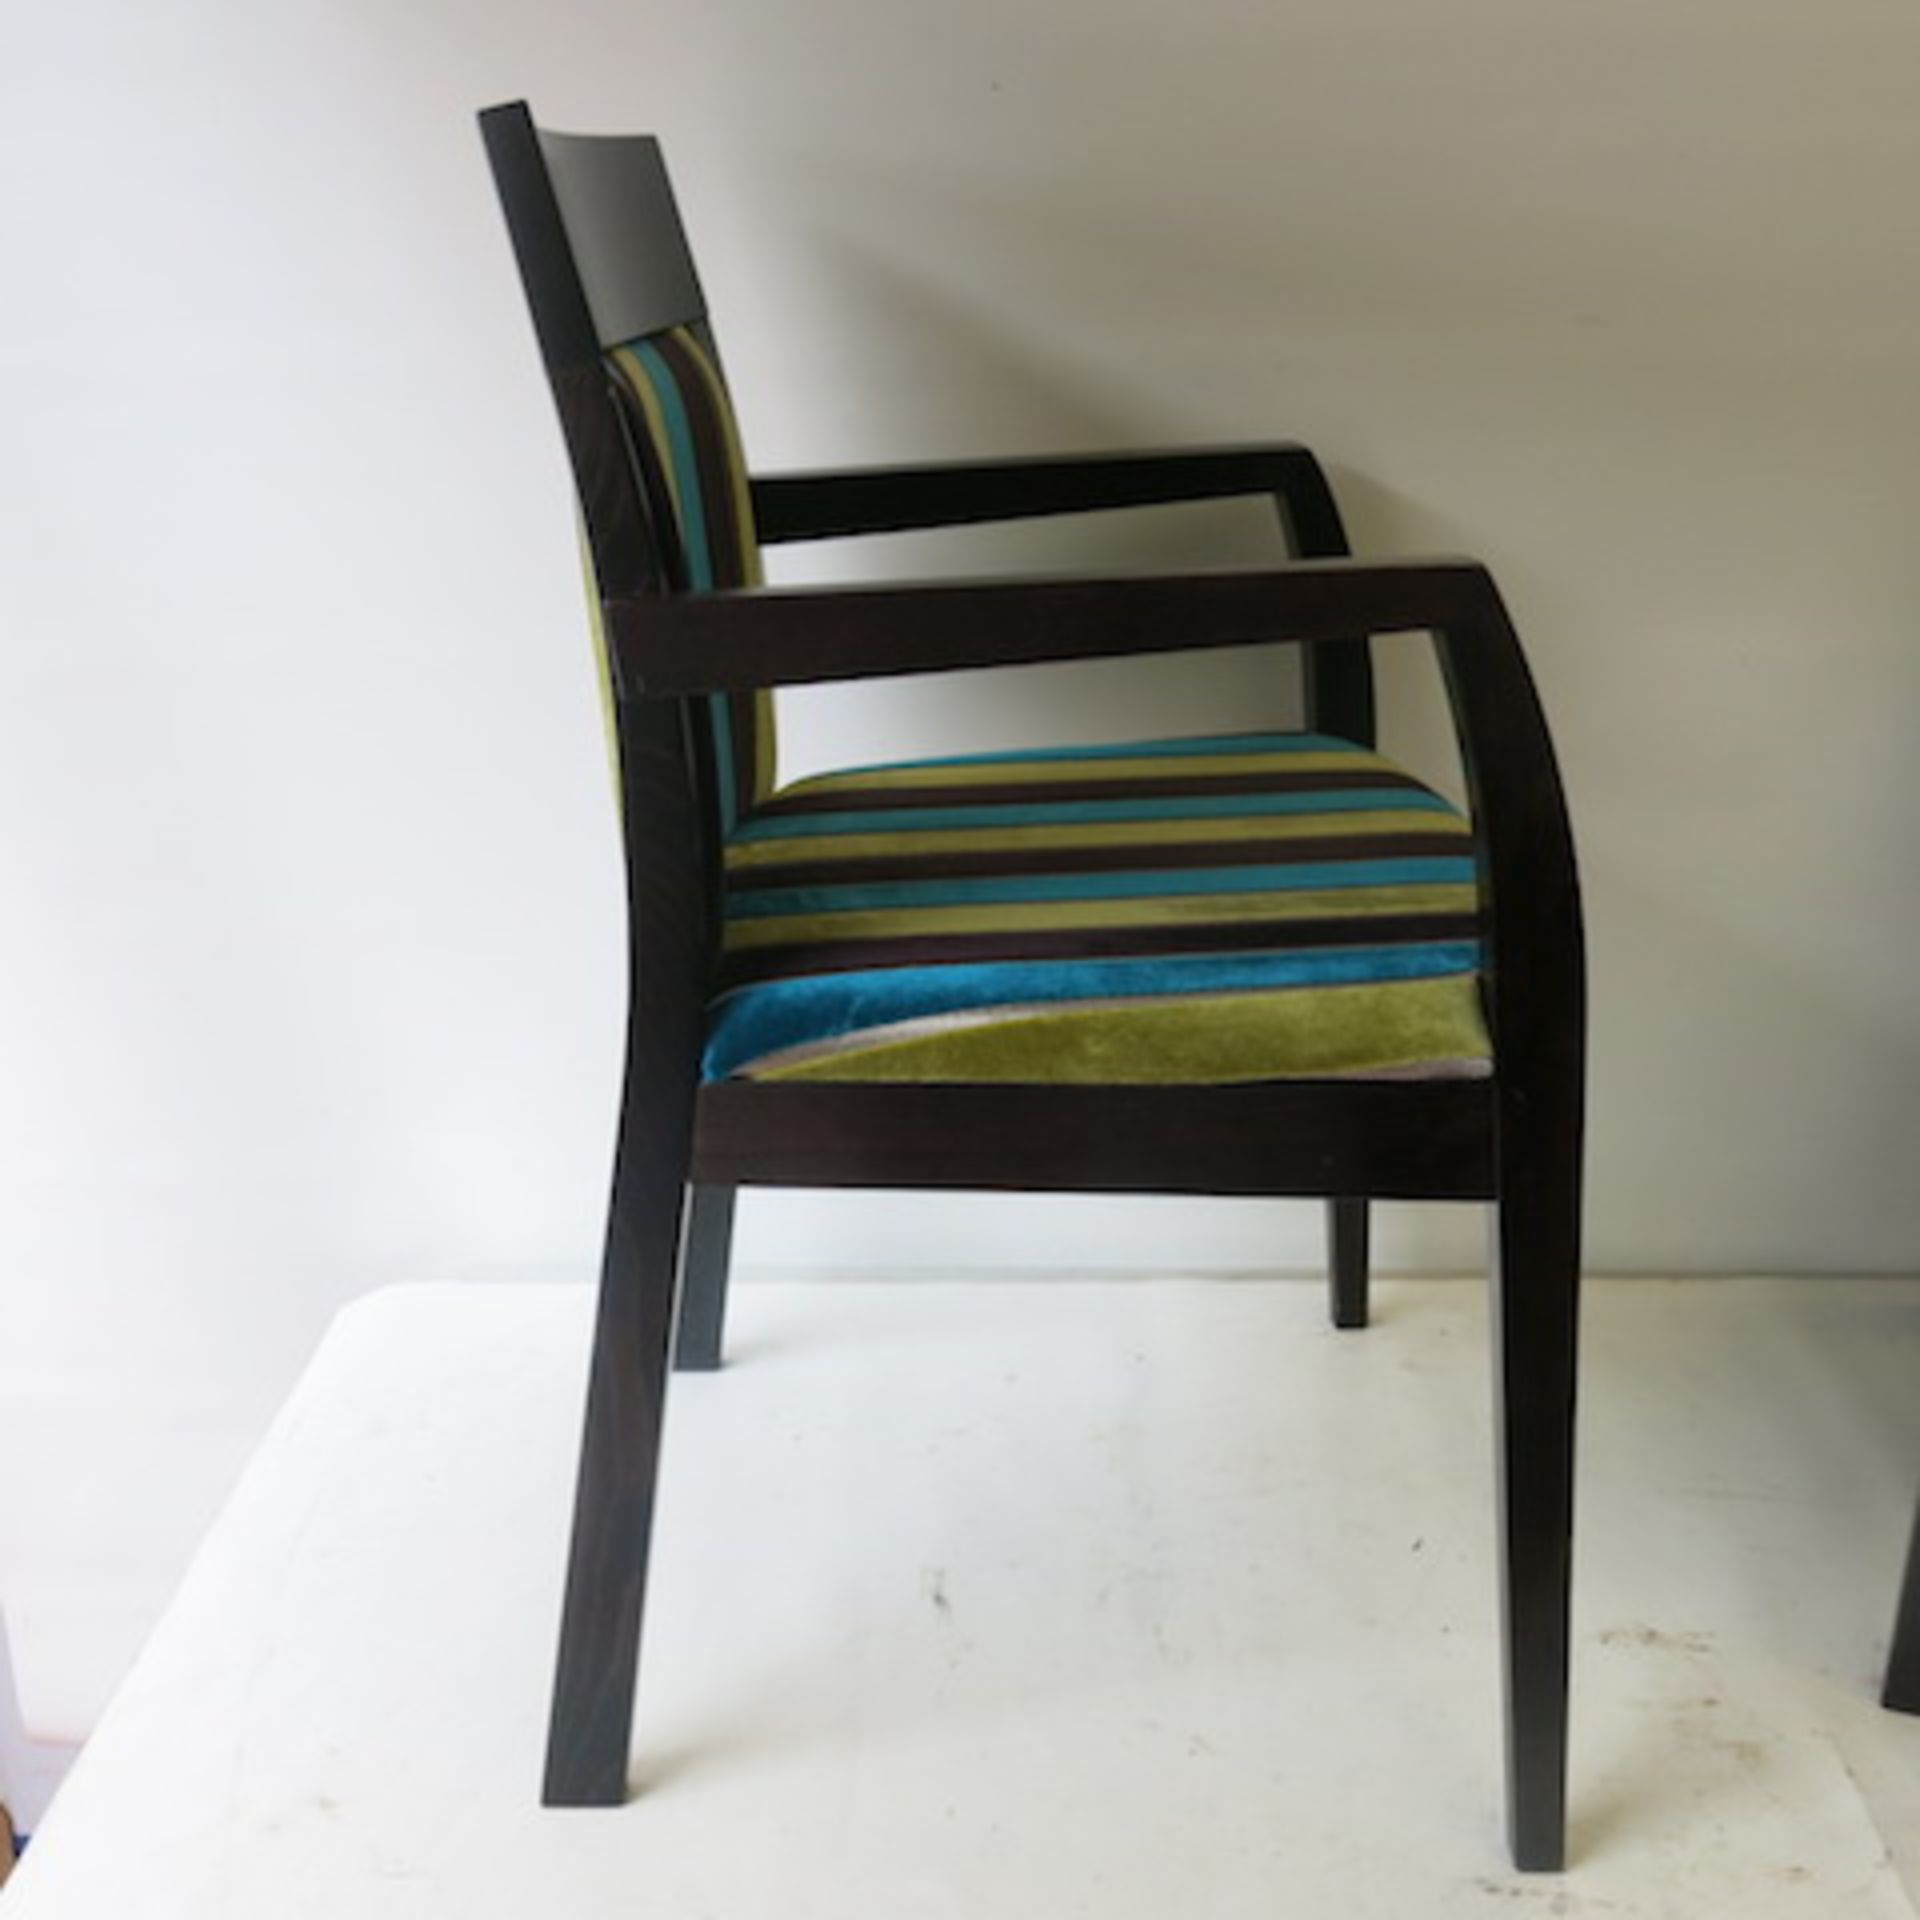 2 x Wooden Framed Dining Chairs with Striped Velour Pattern. Light stains to one seat, but still - Image 5 of 7